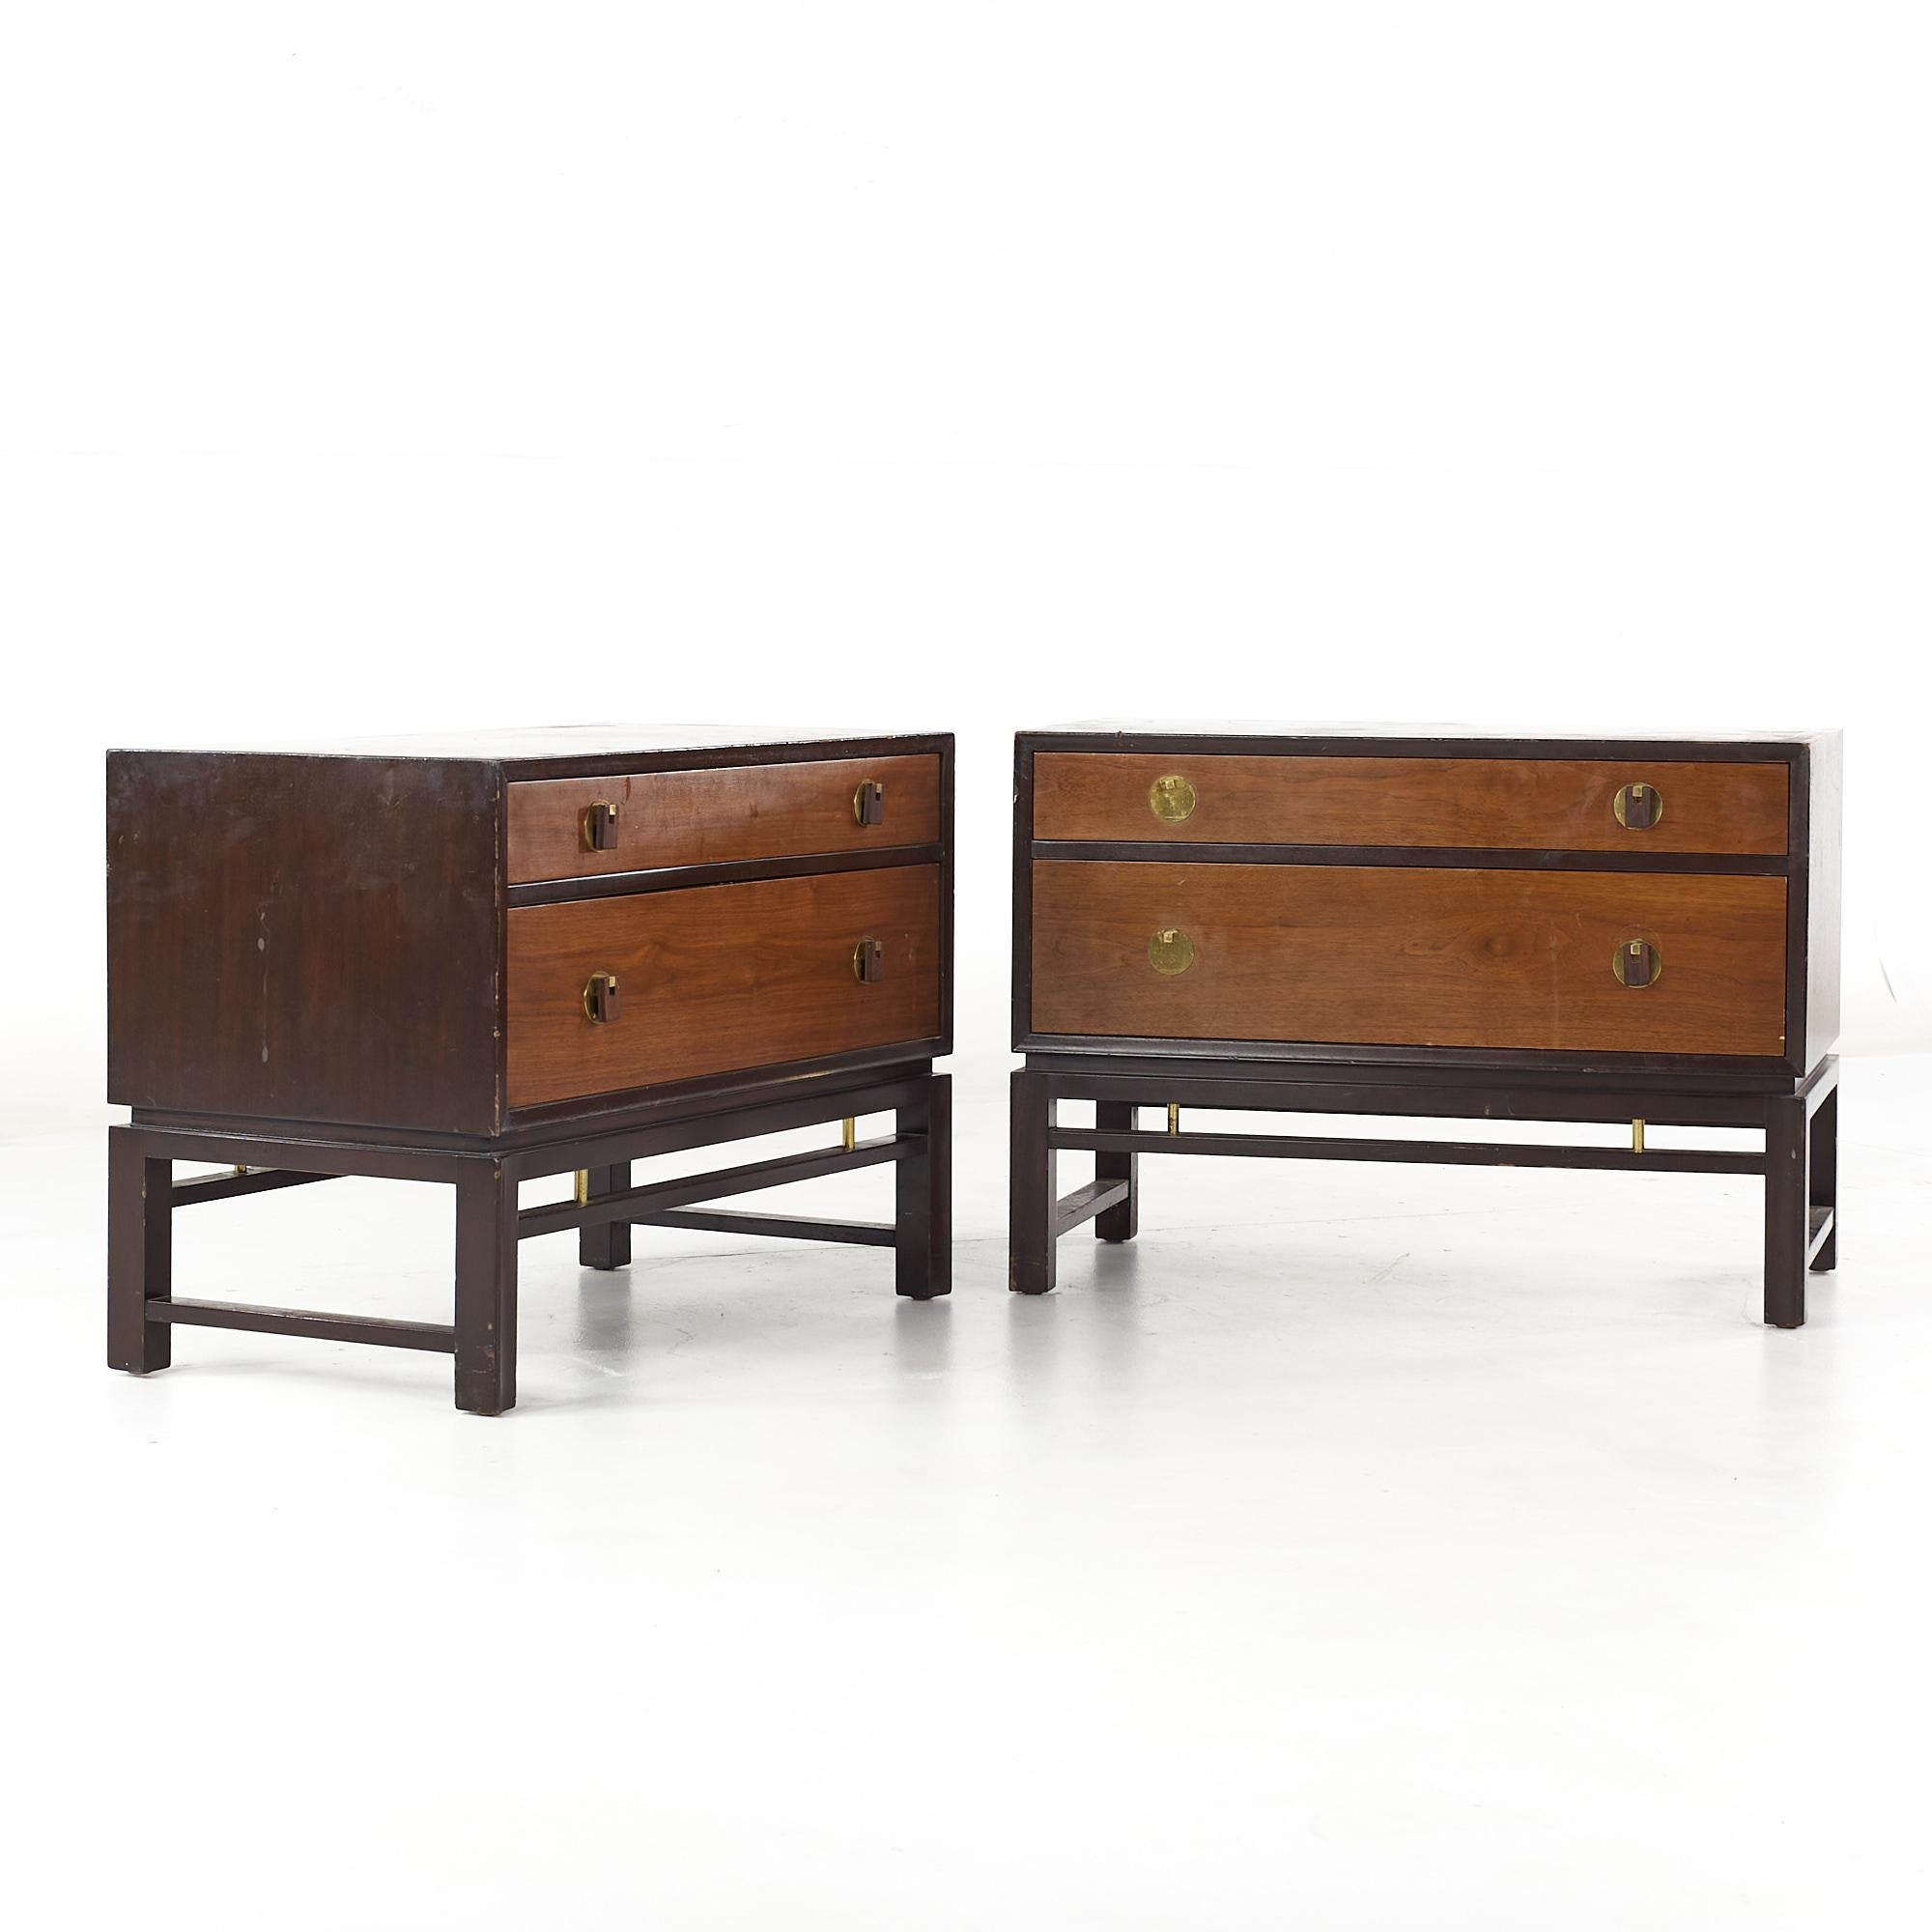 Edward Wormley for Dunbar mid century nightstands - pair

Each nightstand measures: 33 wide x 18 deep x 24 inches high

All pieces of furniture can be had in what we call restored vintage condition. That means the piece is restored upon purchase